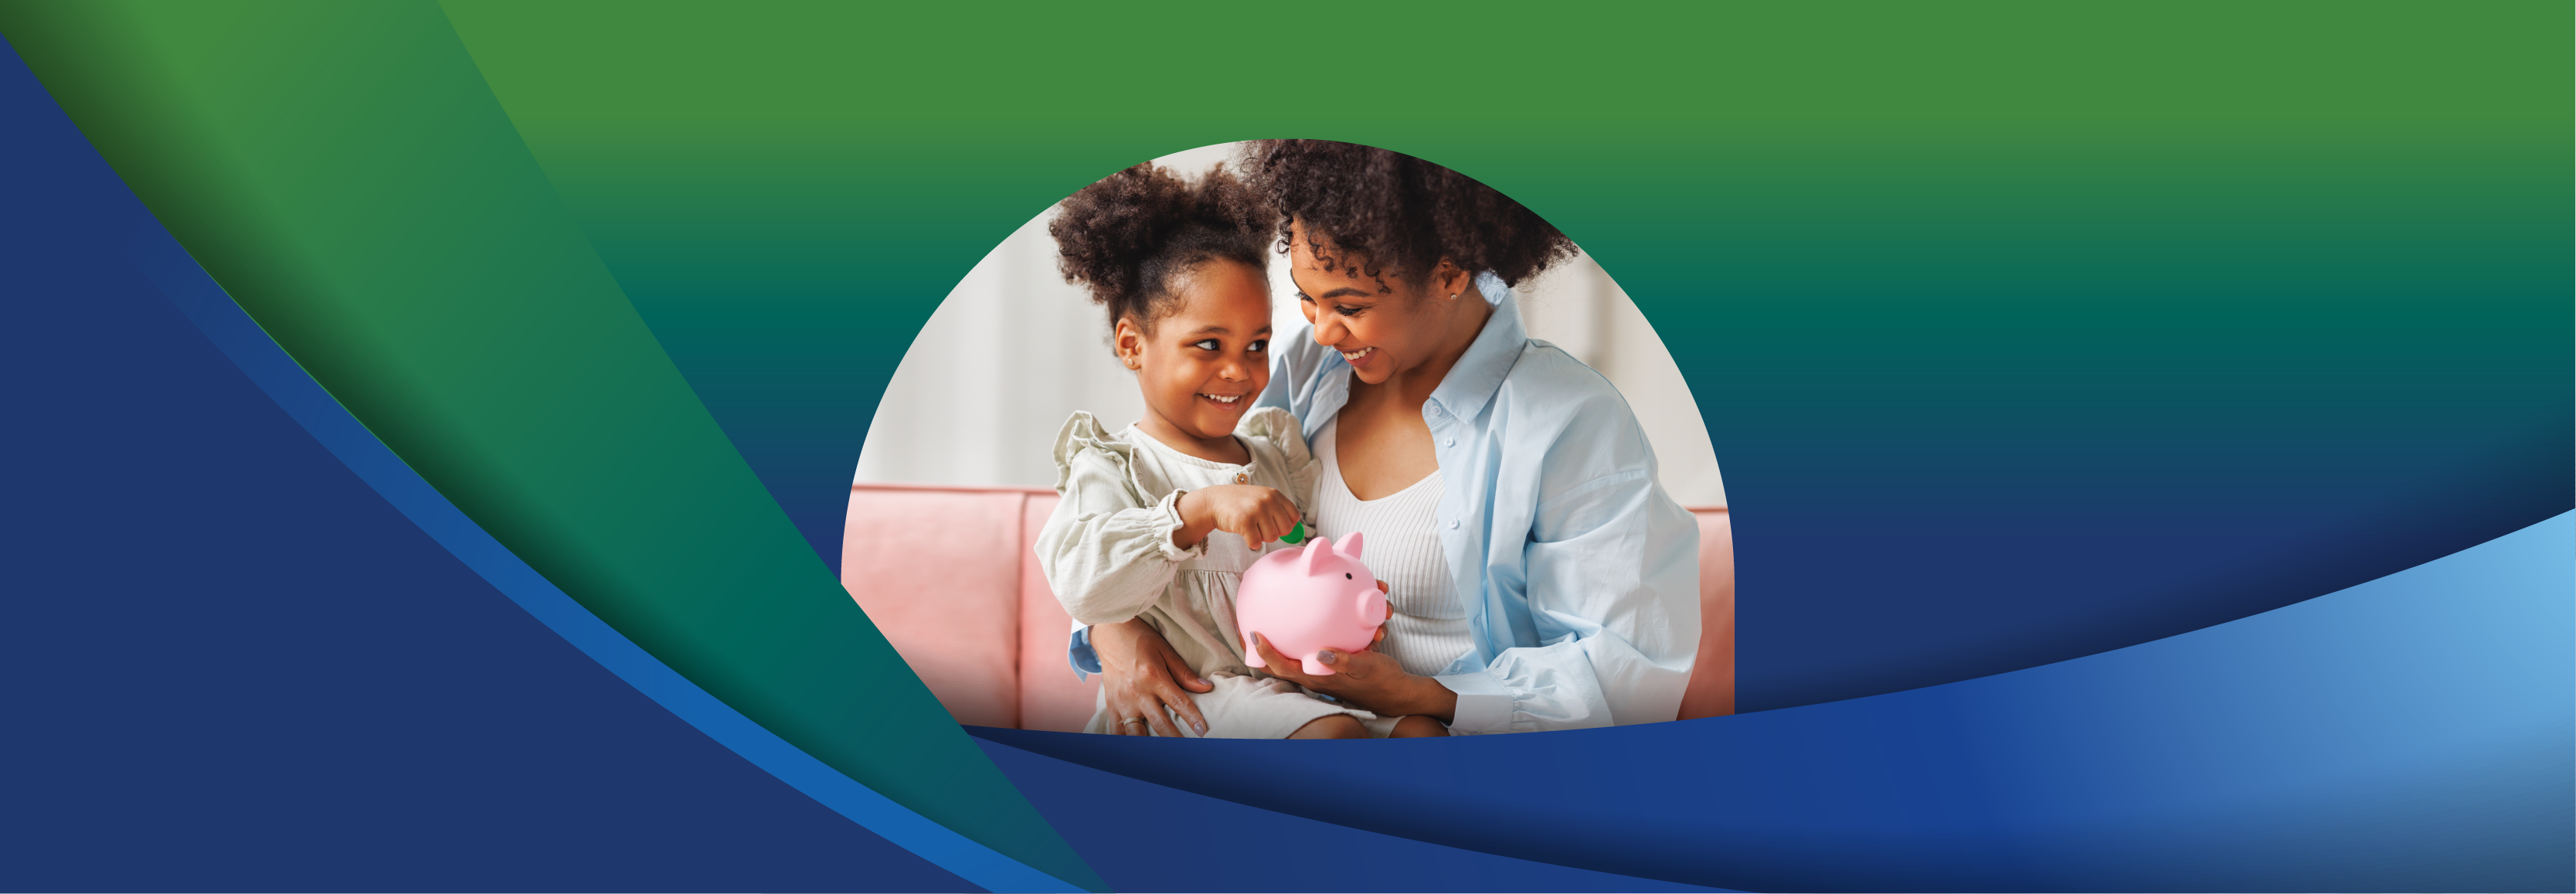 woman and child holding a piggy bank. 